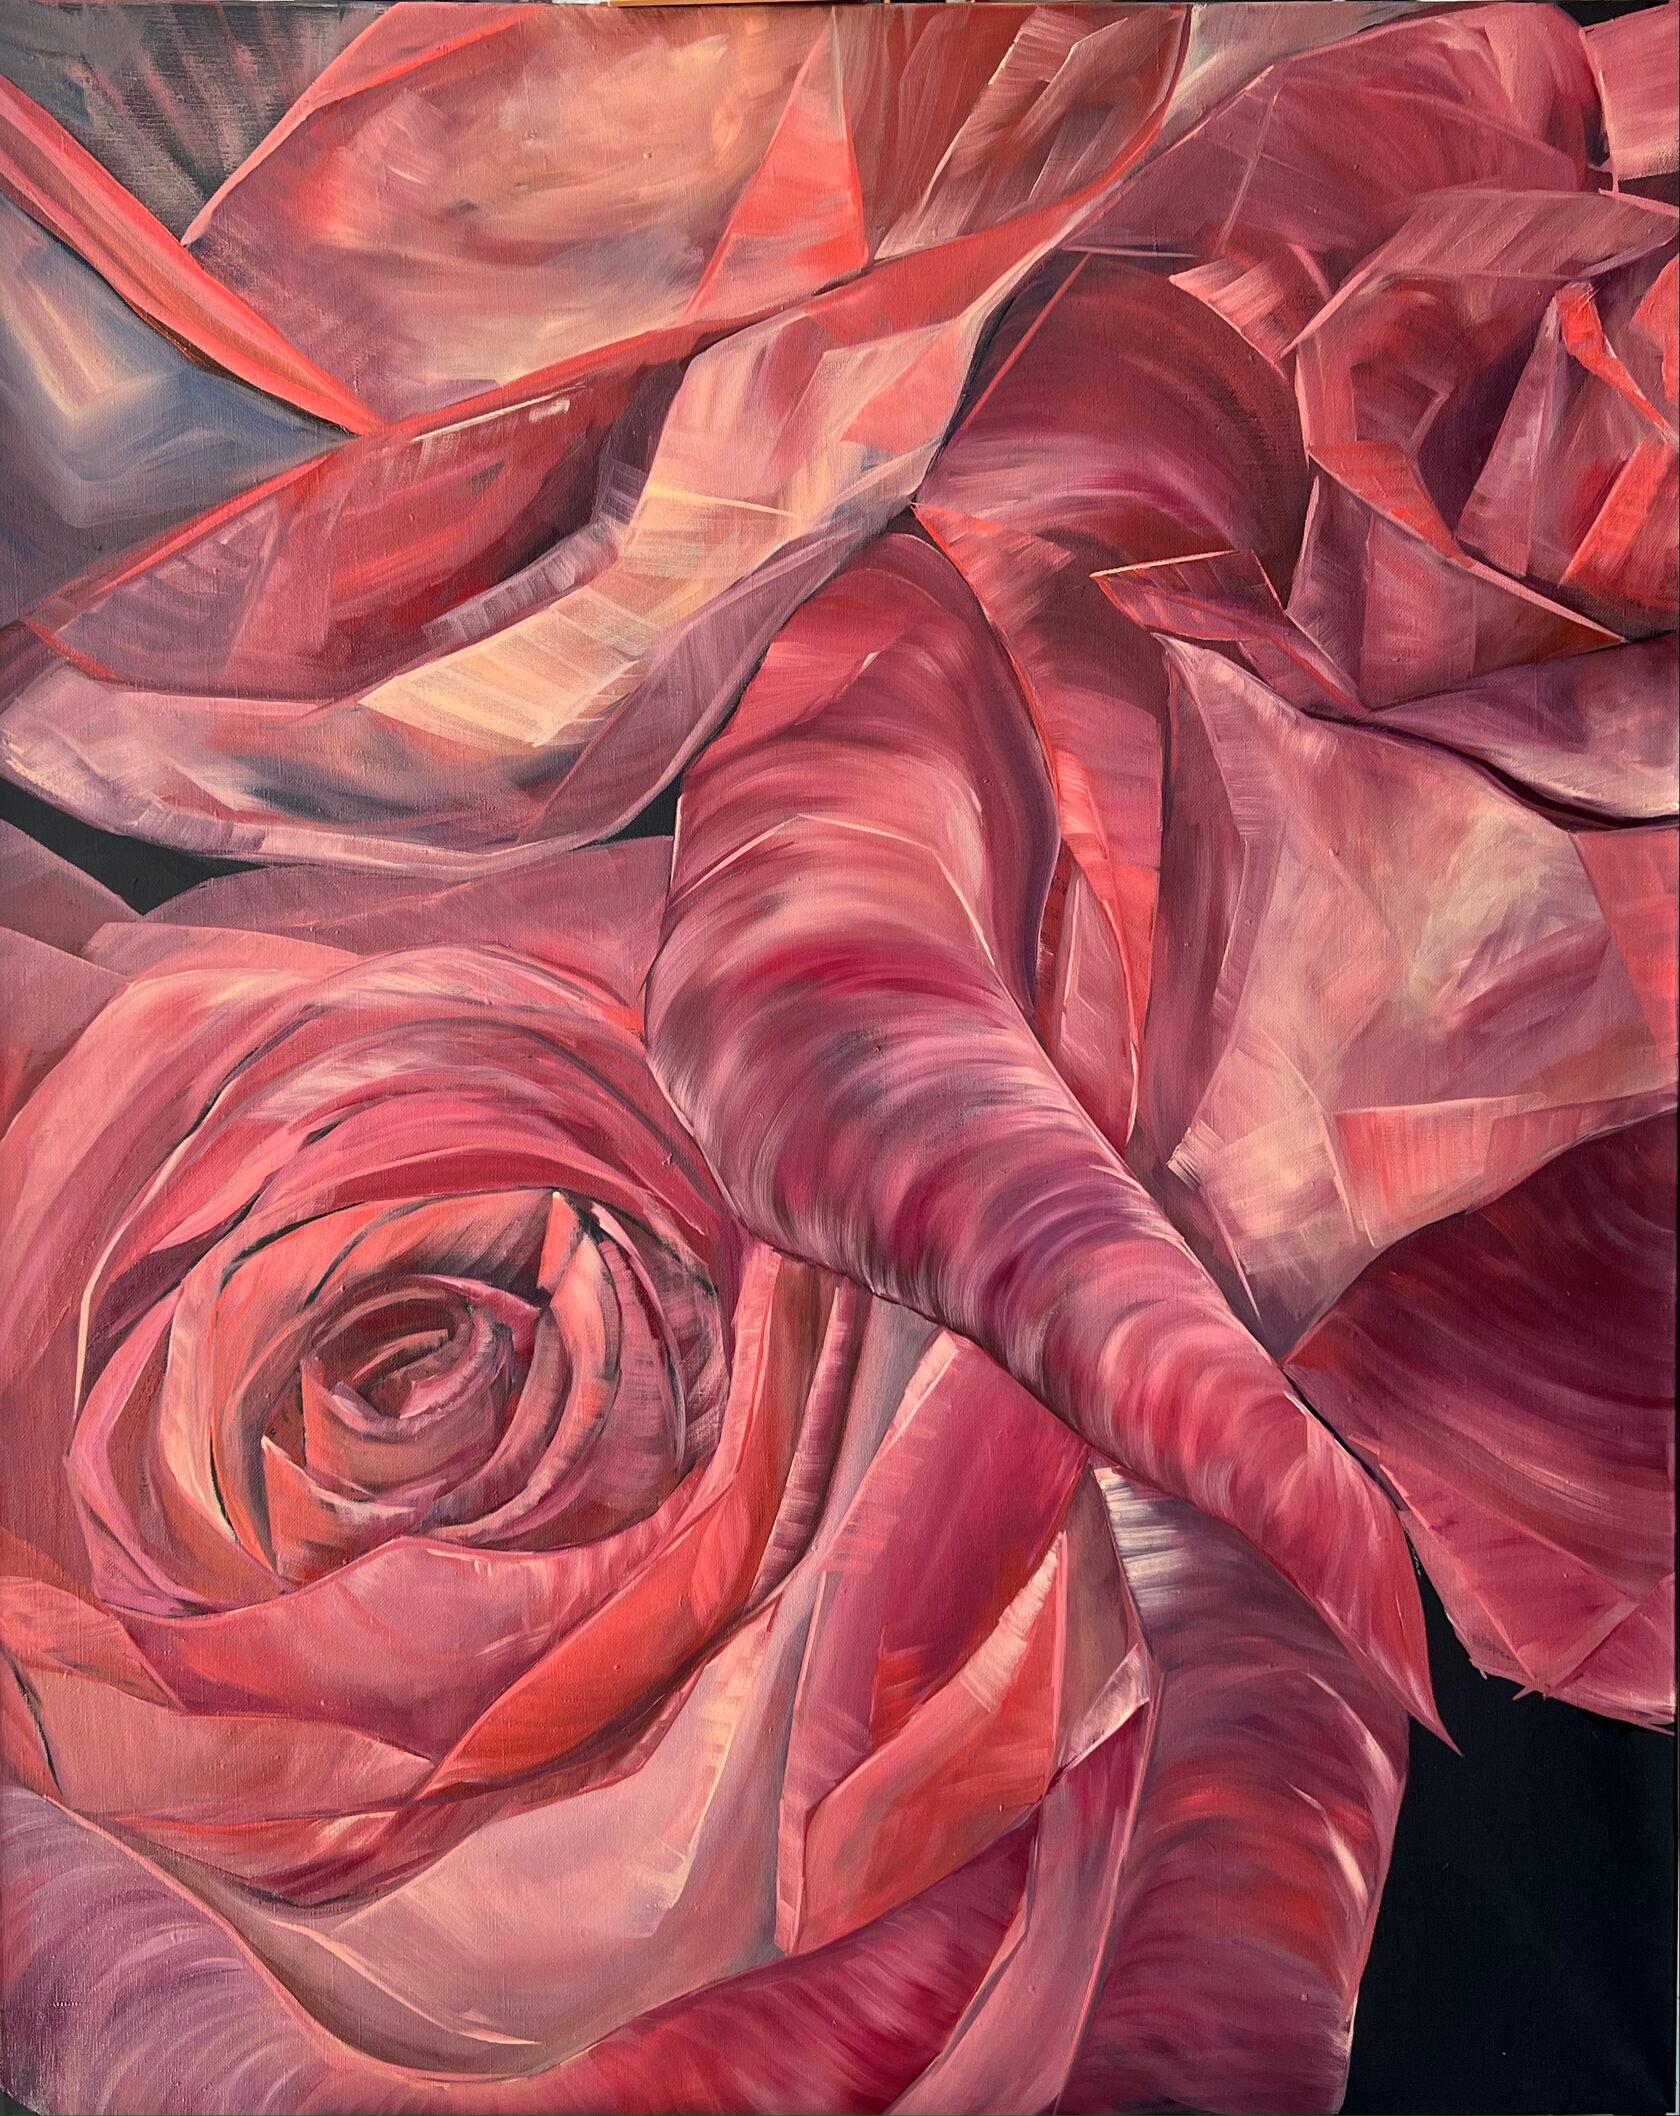 Red roses, 100x80cm - Painting by Inna Sumina